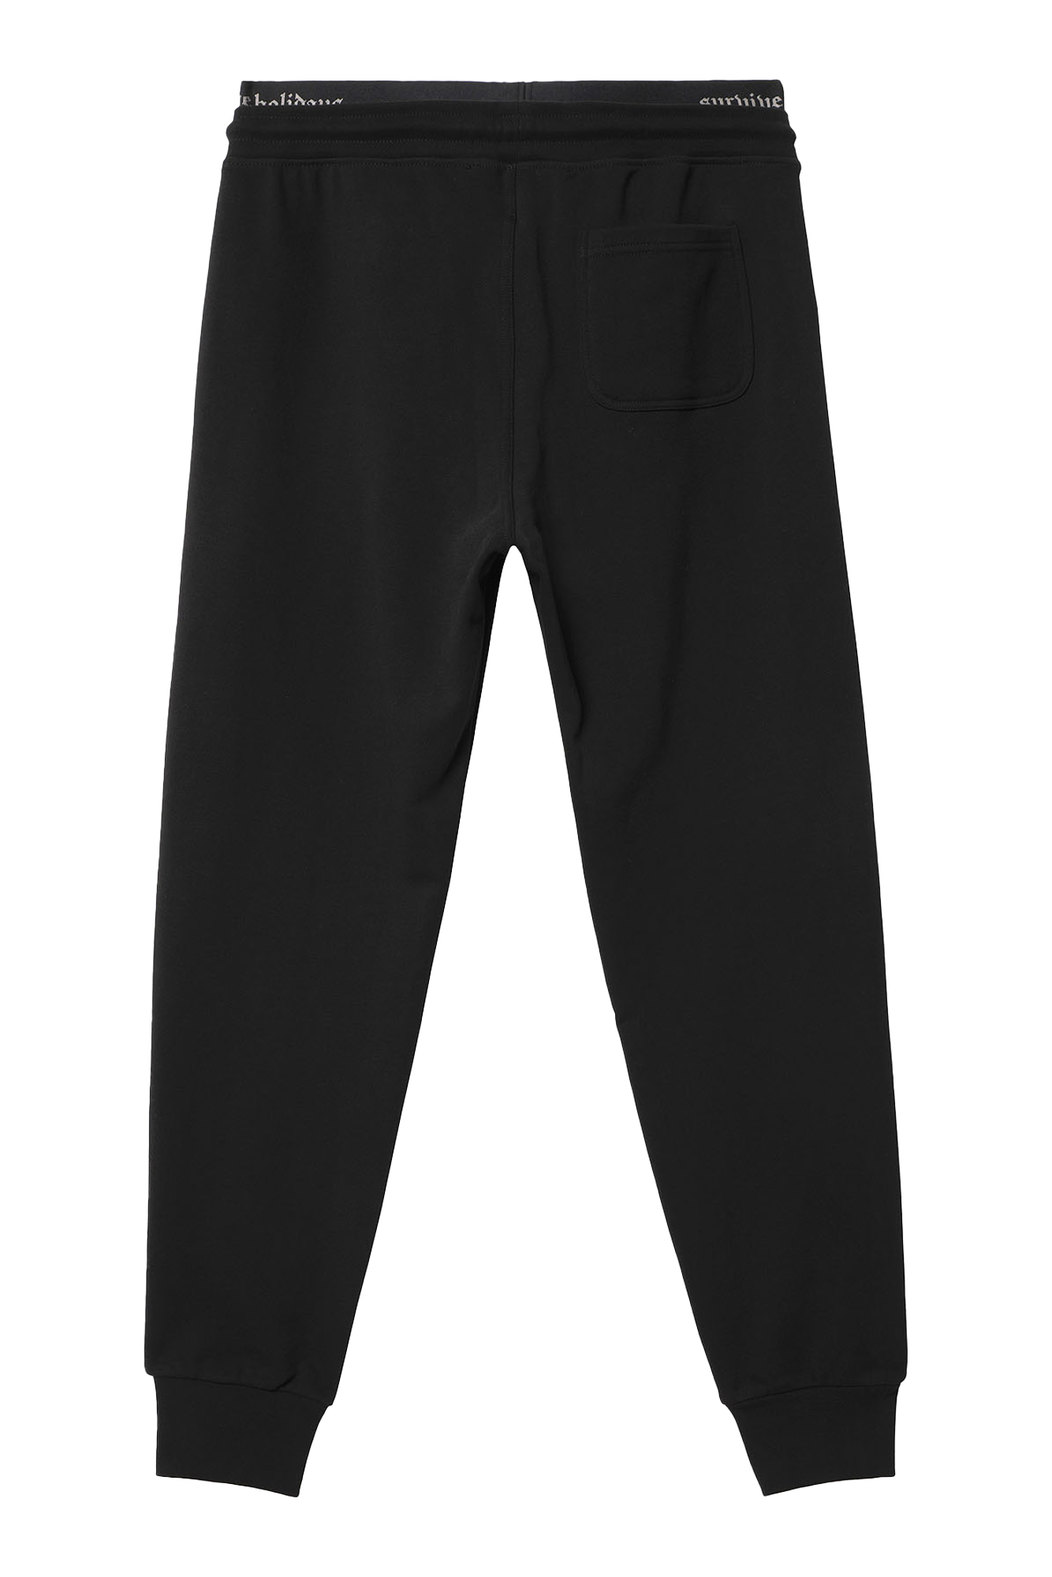 Sweatpants with double waistband